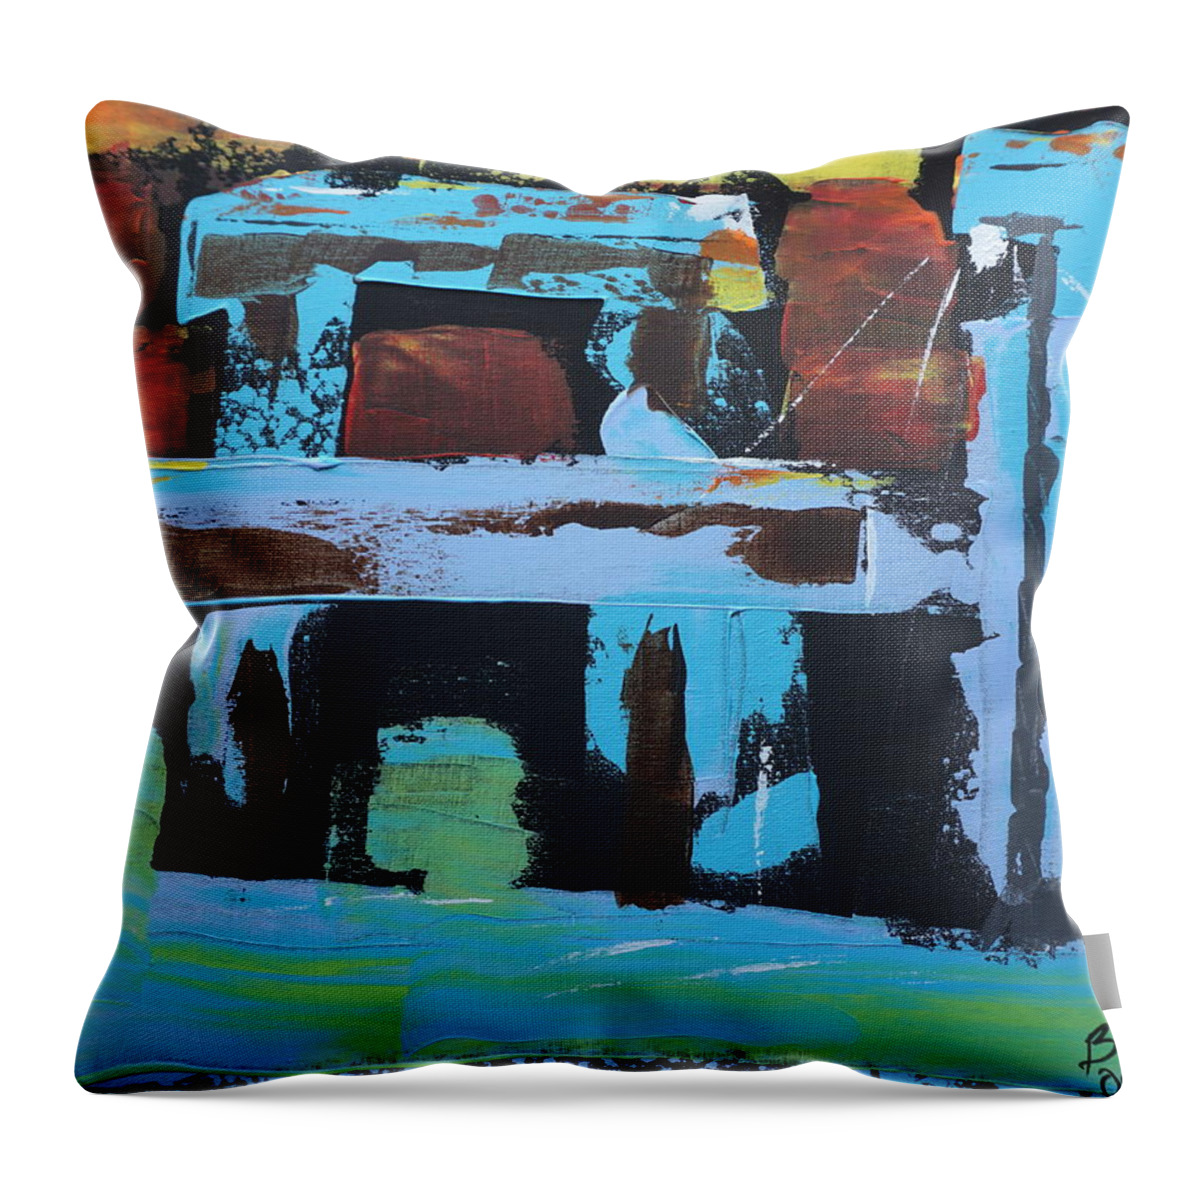 Picnic Throw Pillow featuring the painting Picnic Table At Sunset by Brent Knippel